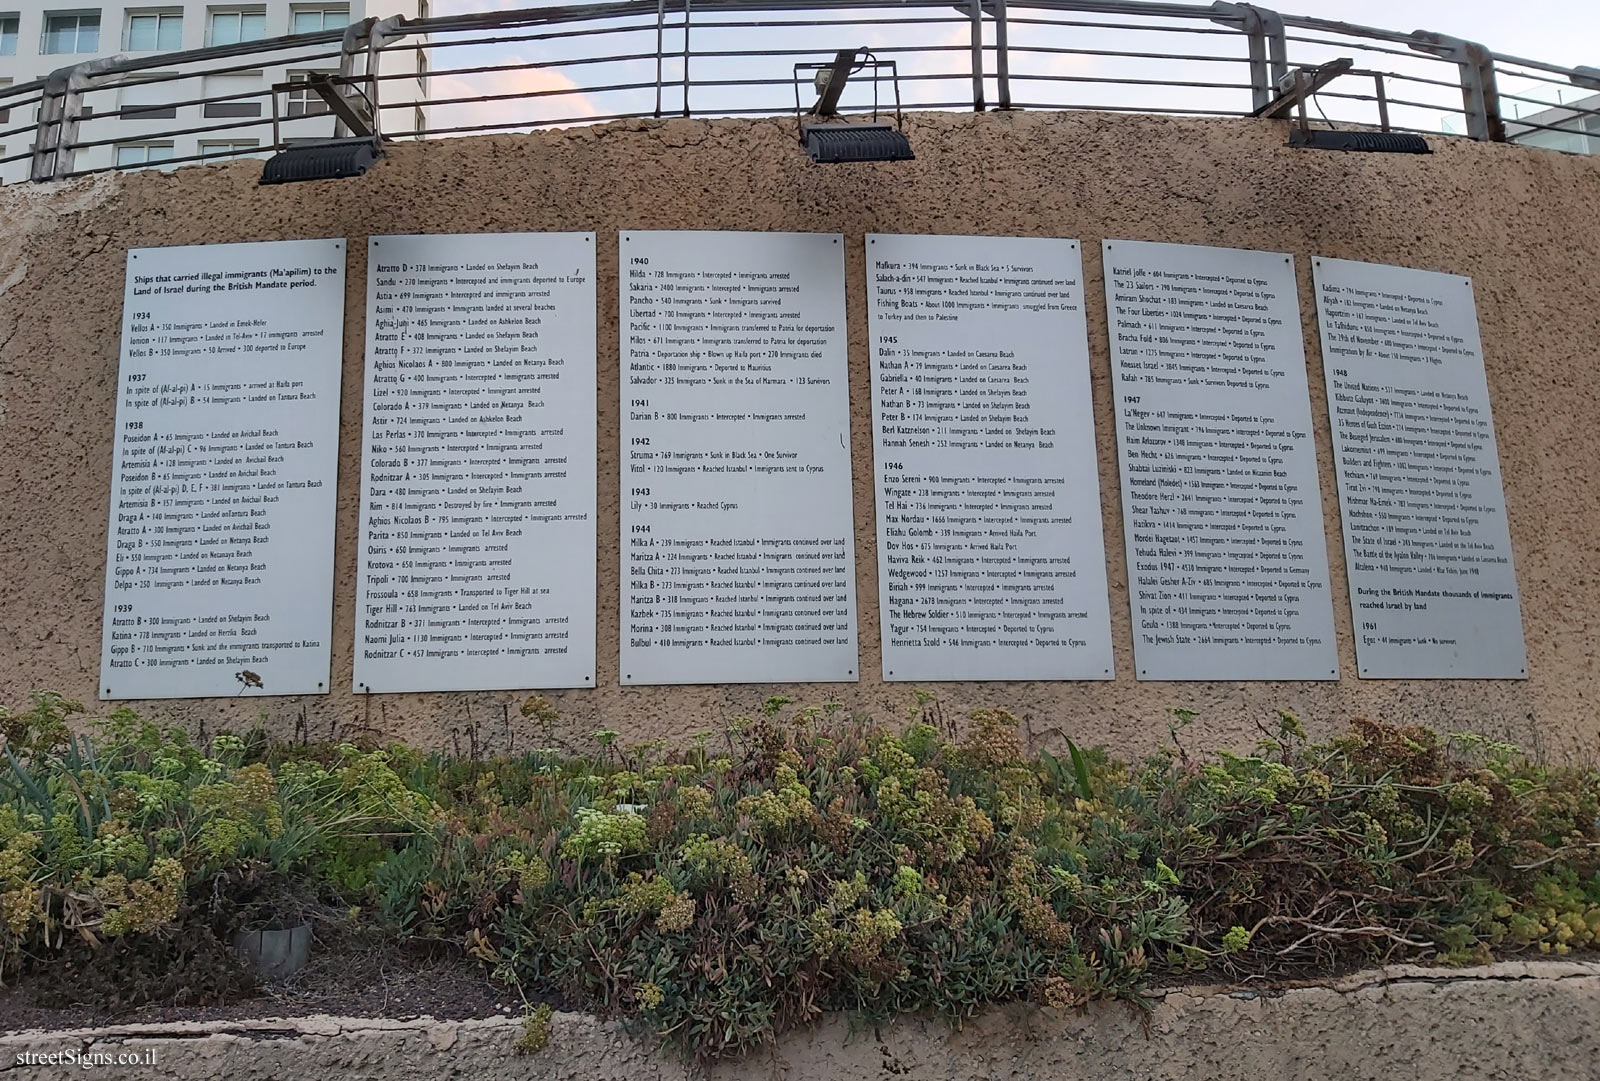 Tel Aviv - London Garden - The story of the illegal immigration - The names of the immigrations ships